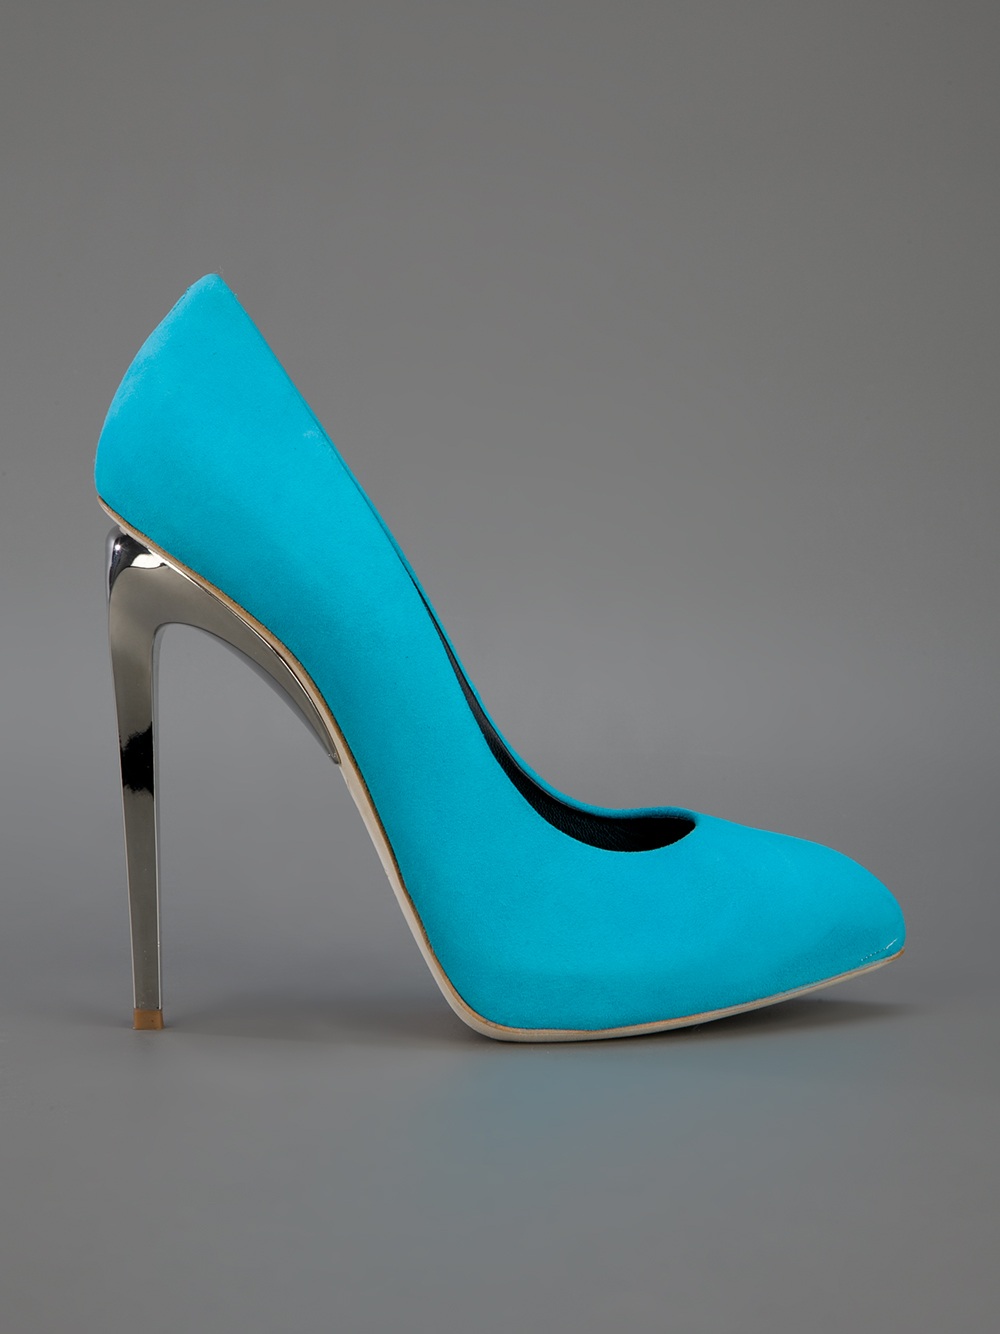 Giuseppe zanotti Pointed Toe Pump in Blue (turquoise) | Lyst